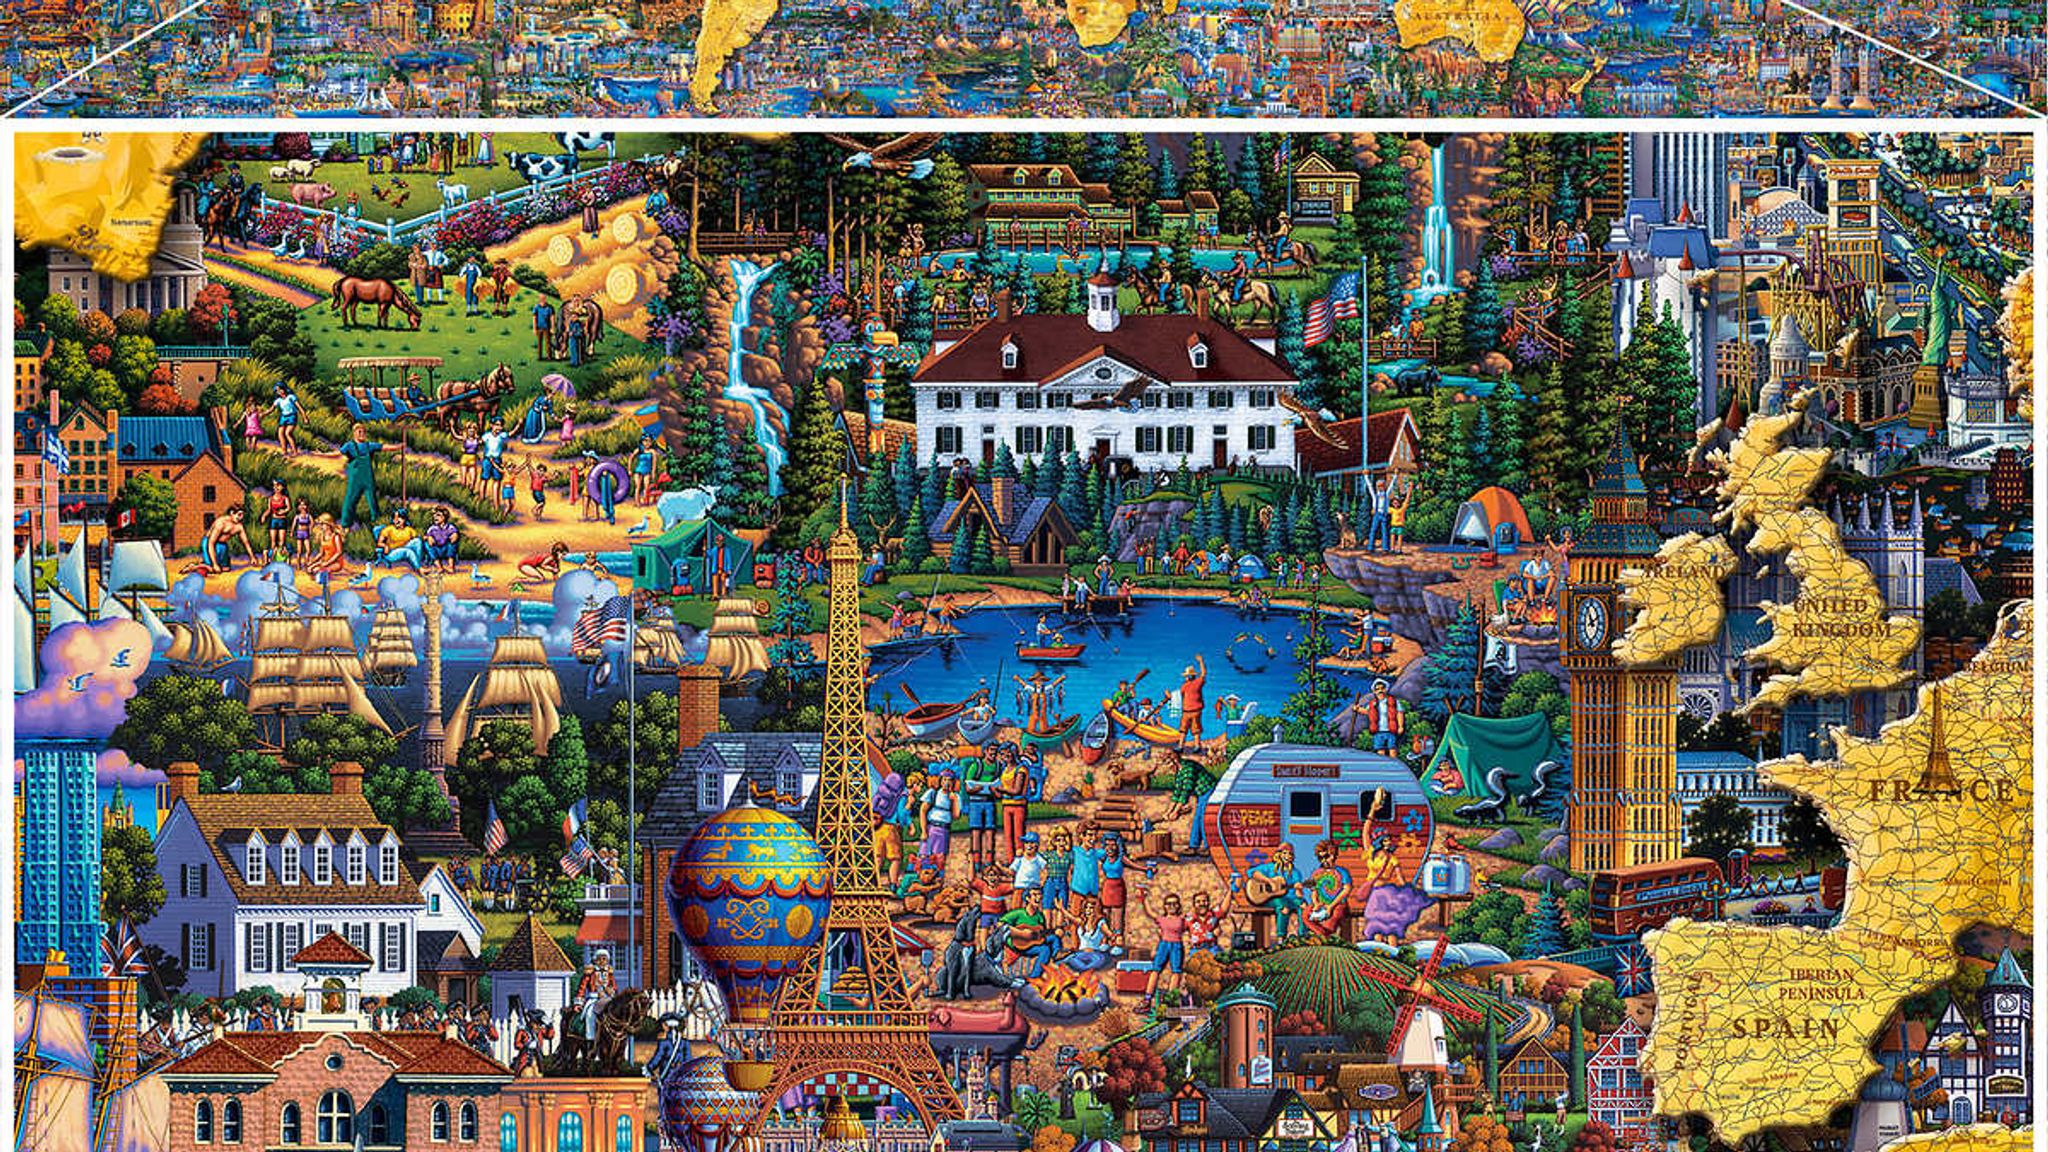 World's largest puzzle goes on sale at Costco - here's how much it